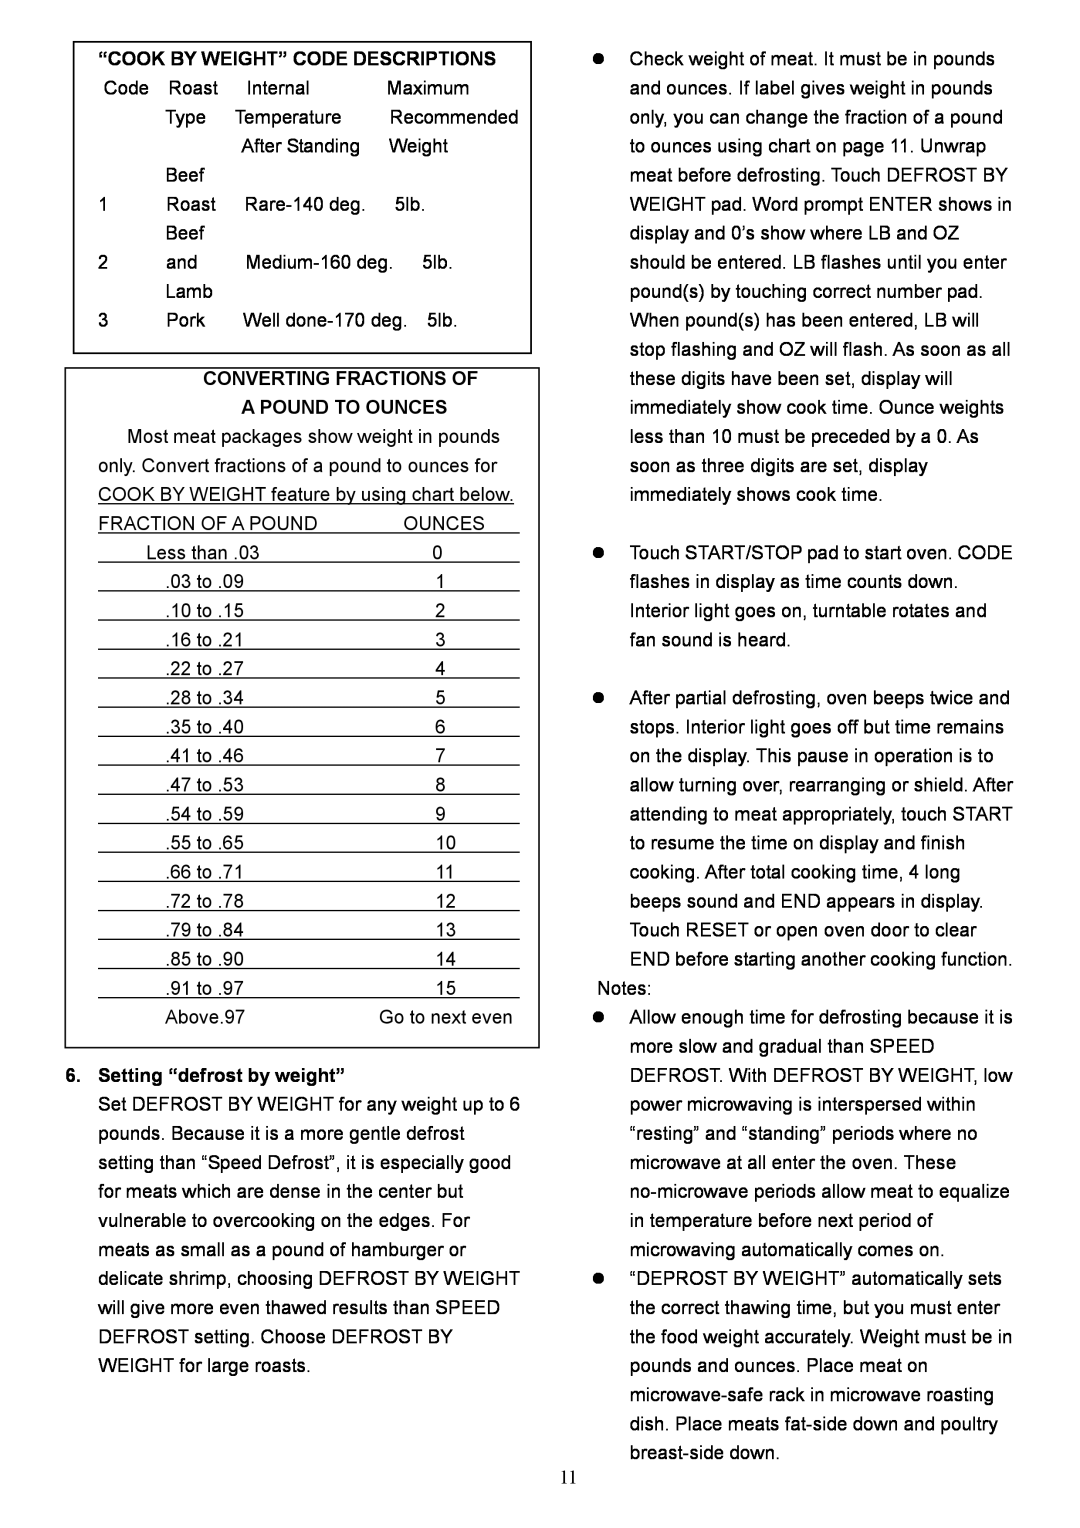 Danby DMW945SS owner manual “Cook By Weight” Code Descriptions, Converting Fractions Of, Setting “defrost by weight” 